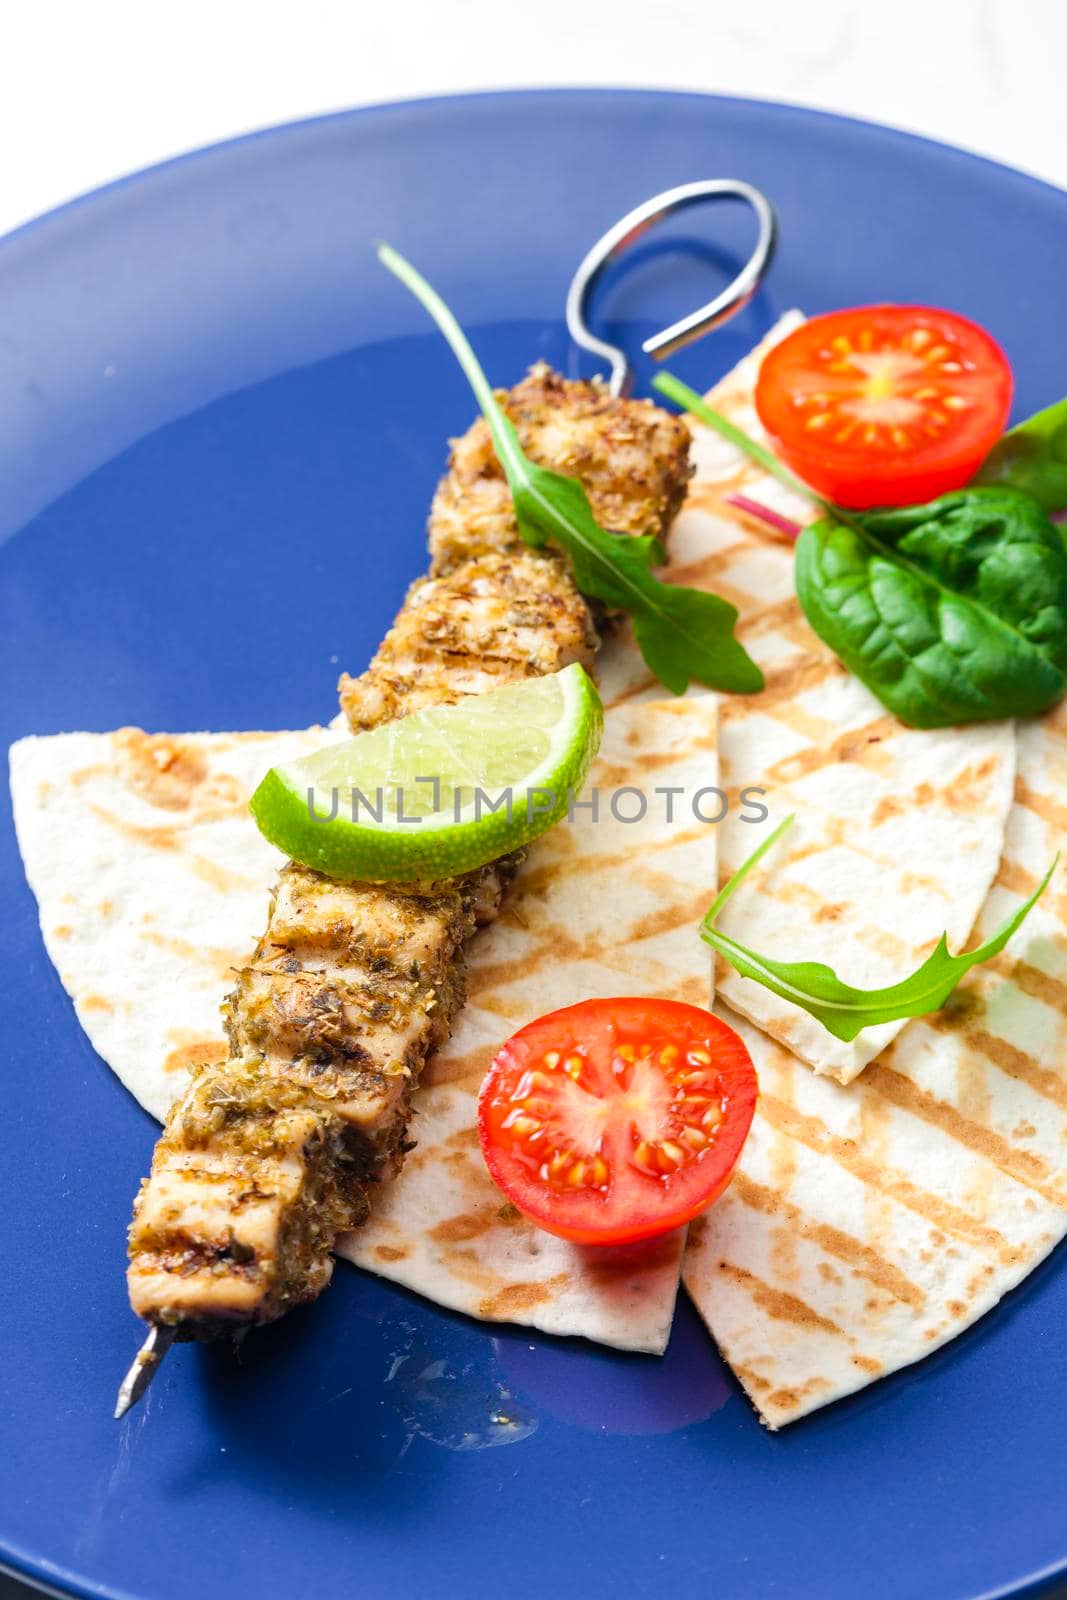 herbal meat skewer  with pita bread, tomatoes and lime